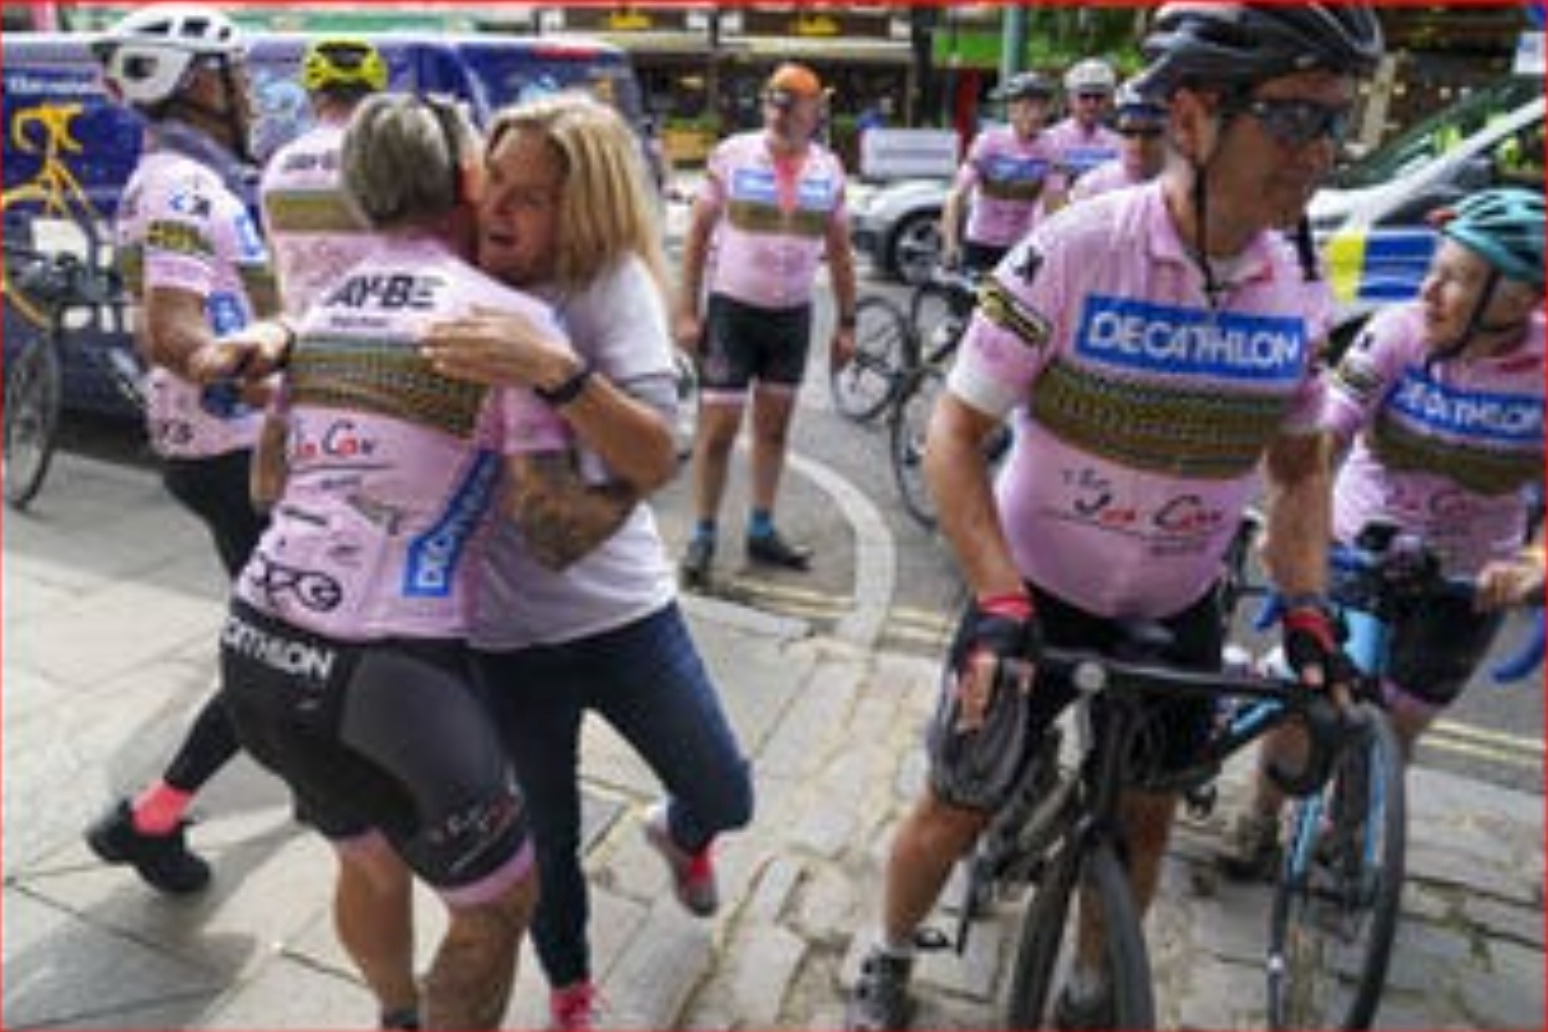 Cyclists’ gruelling 280-mile bike ride raises funds for Jo Cox Foundation. 